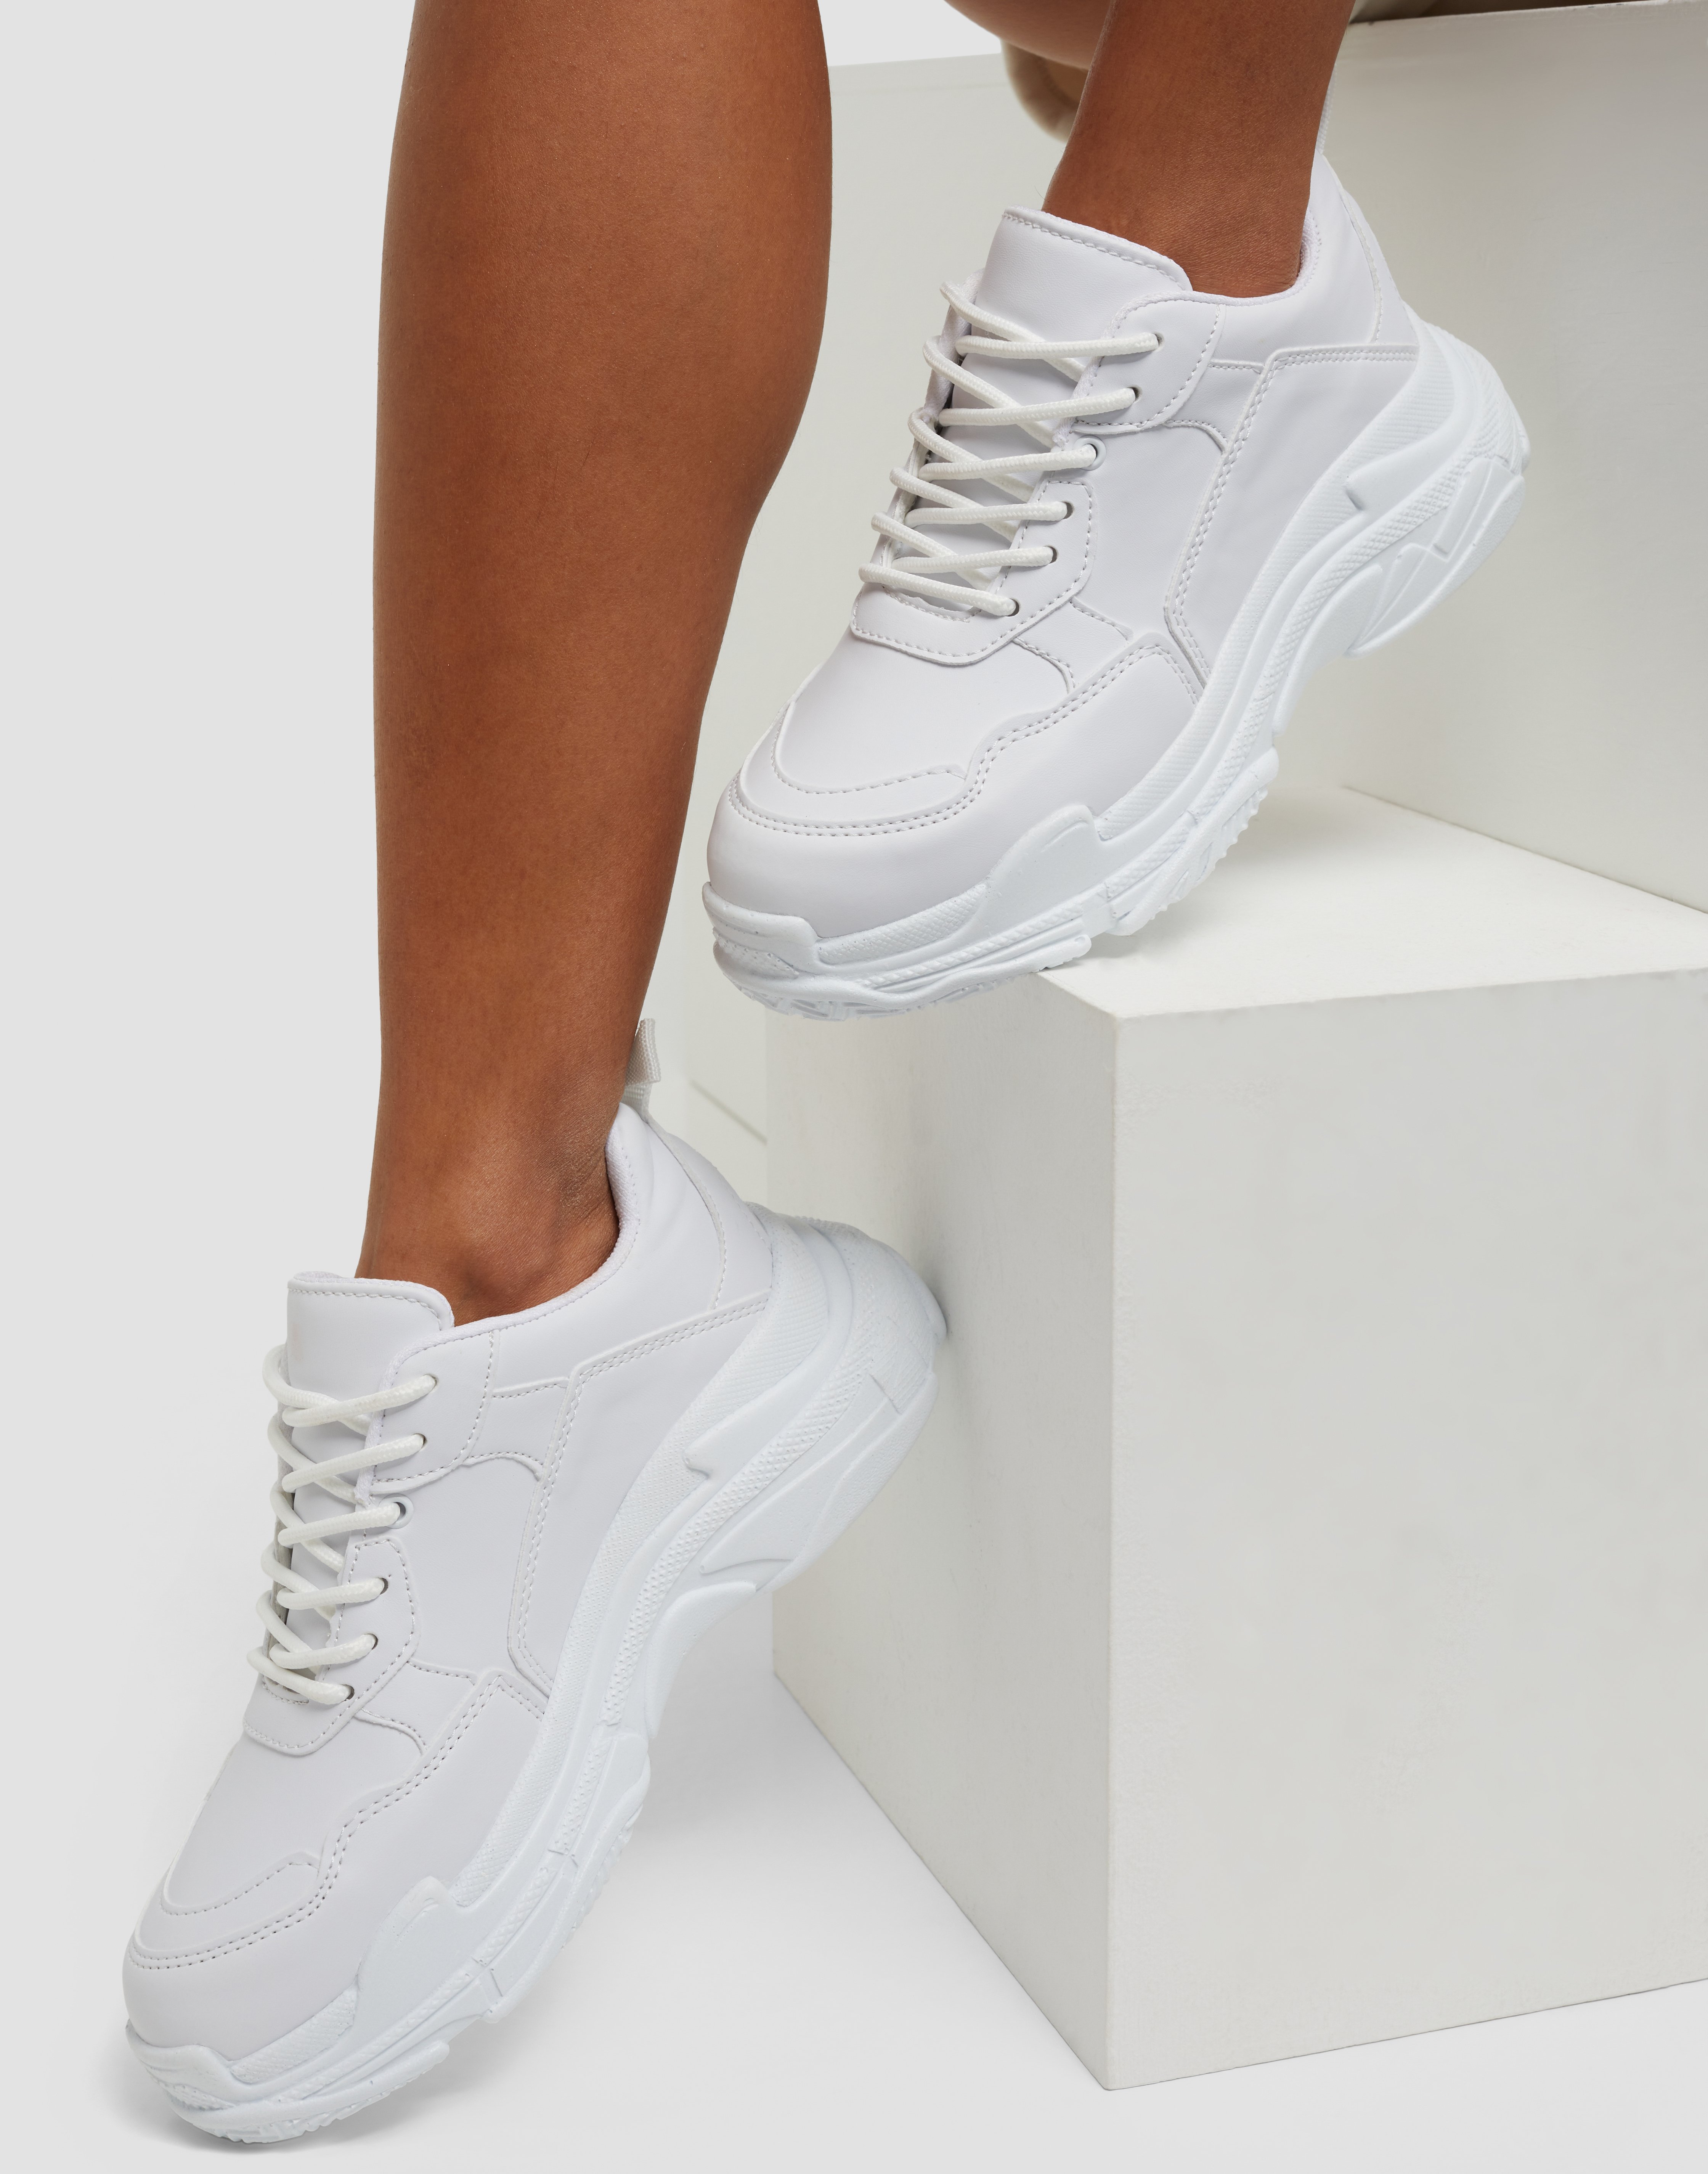 nelly chunky sneakers blogg